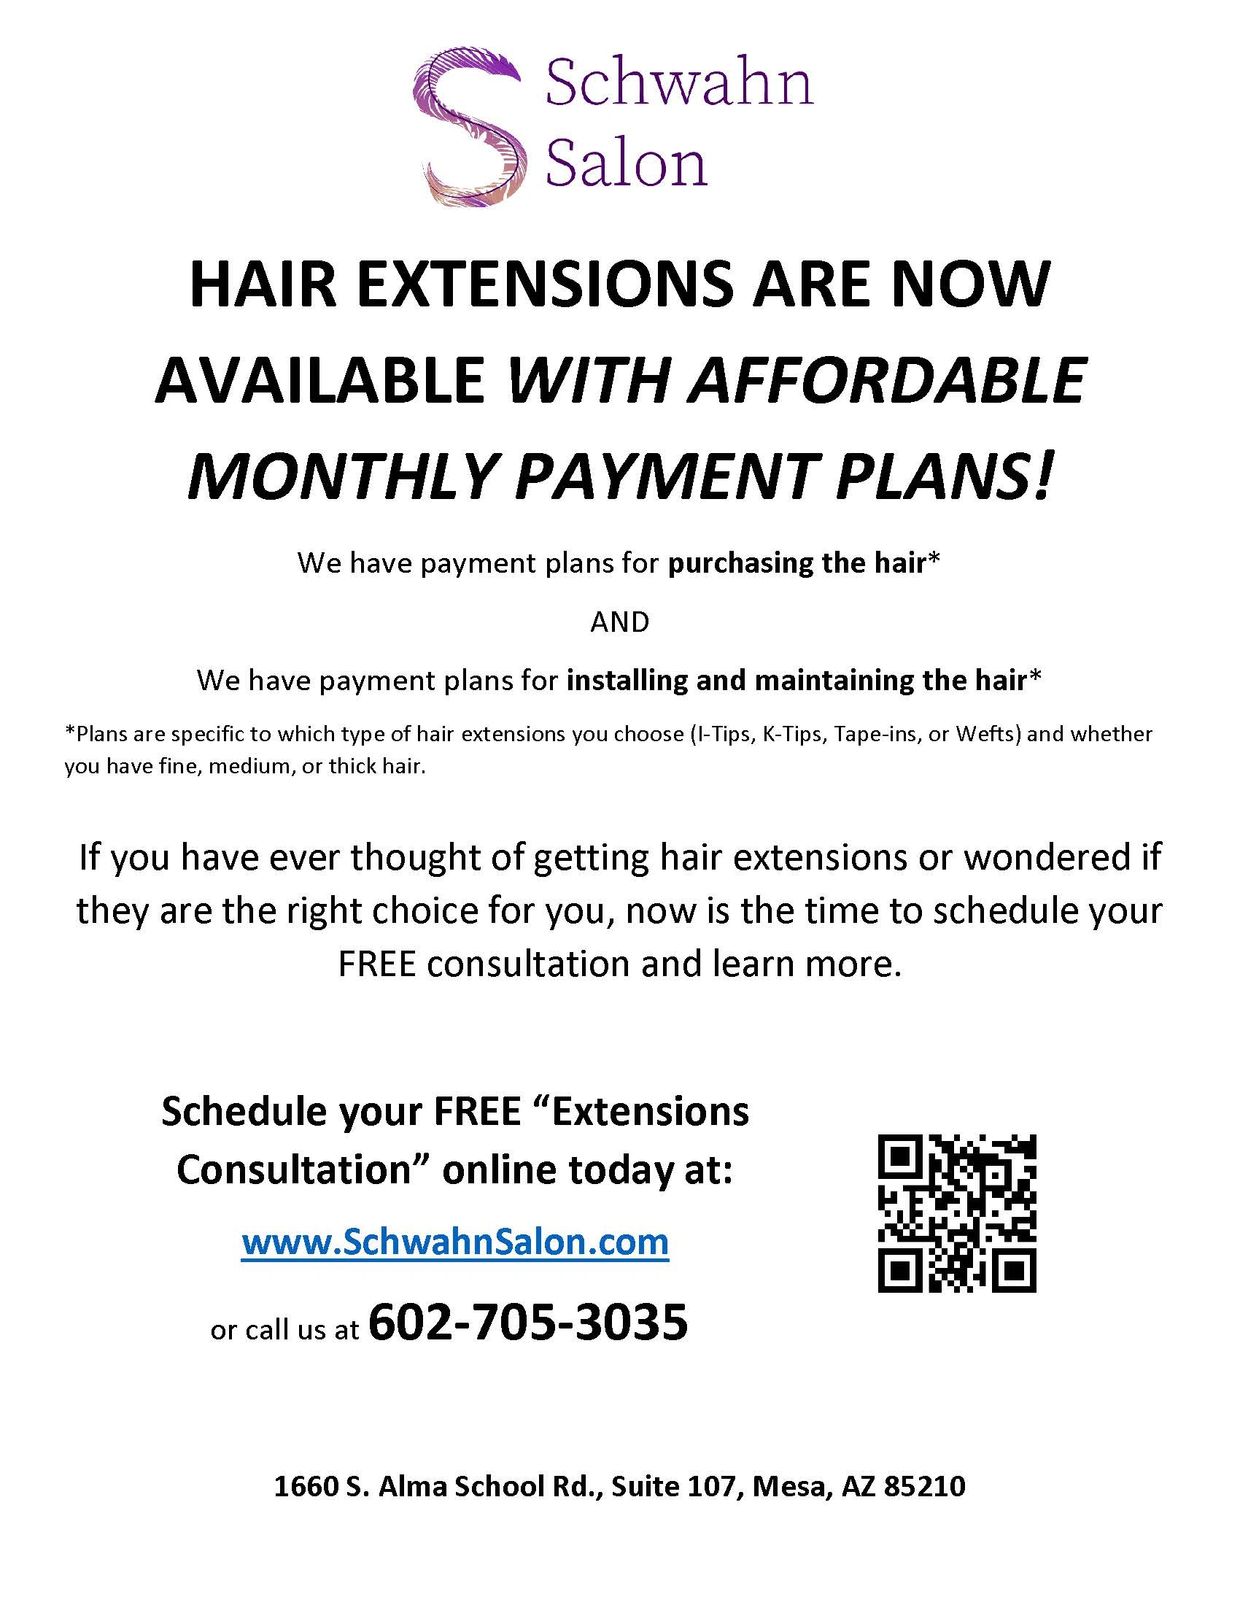 hair extension monthly payment plans info